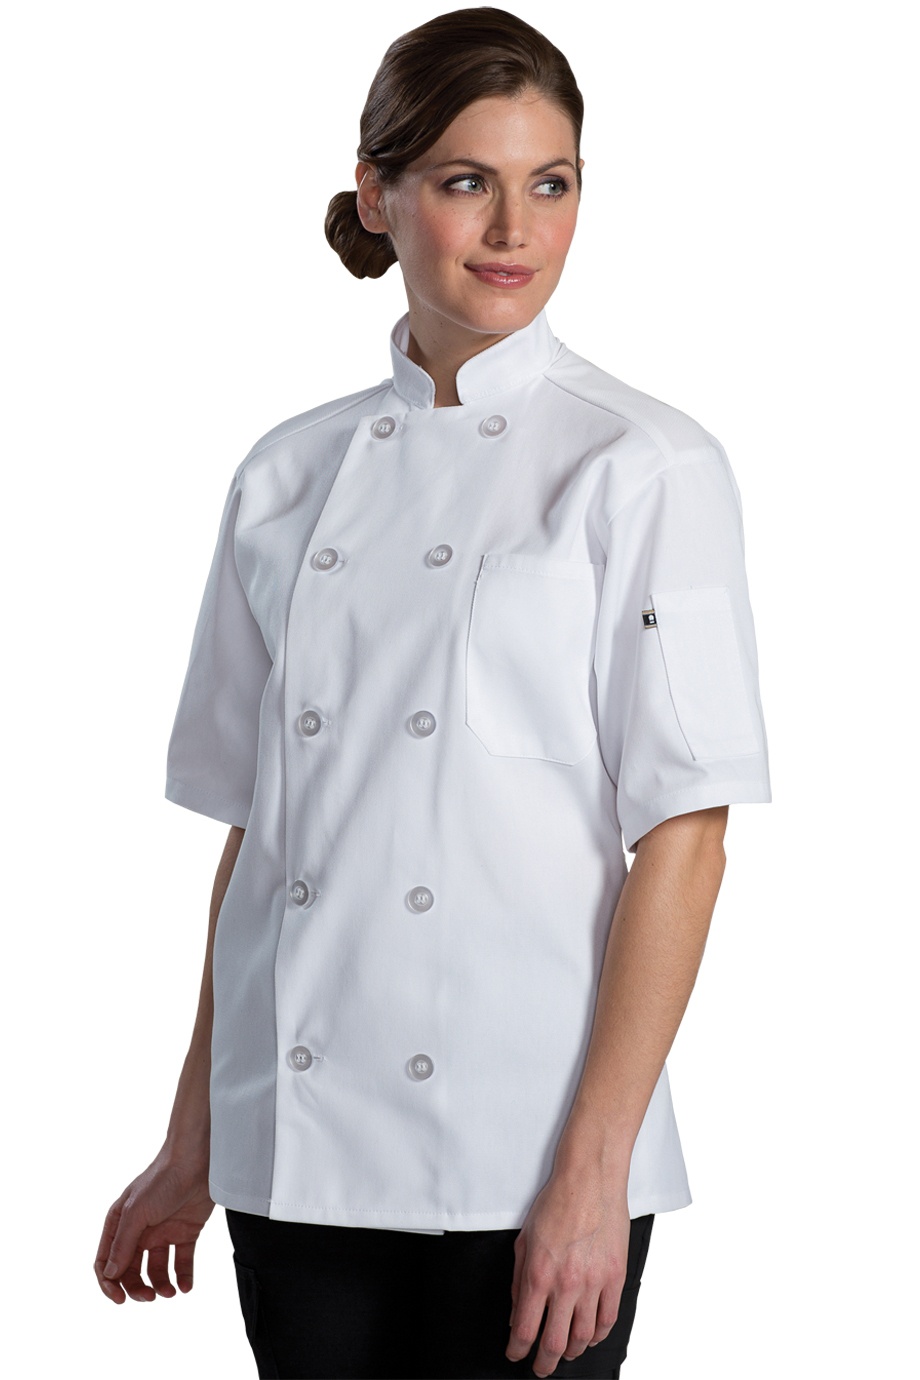 'Edwards 3333 10 Button Short Sleeve Chef Coat With Mesh'